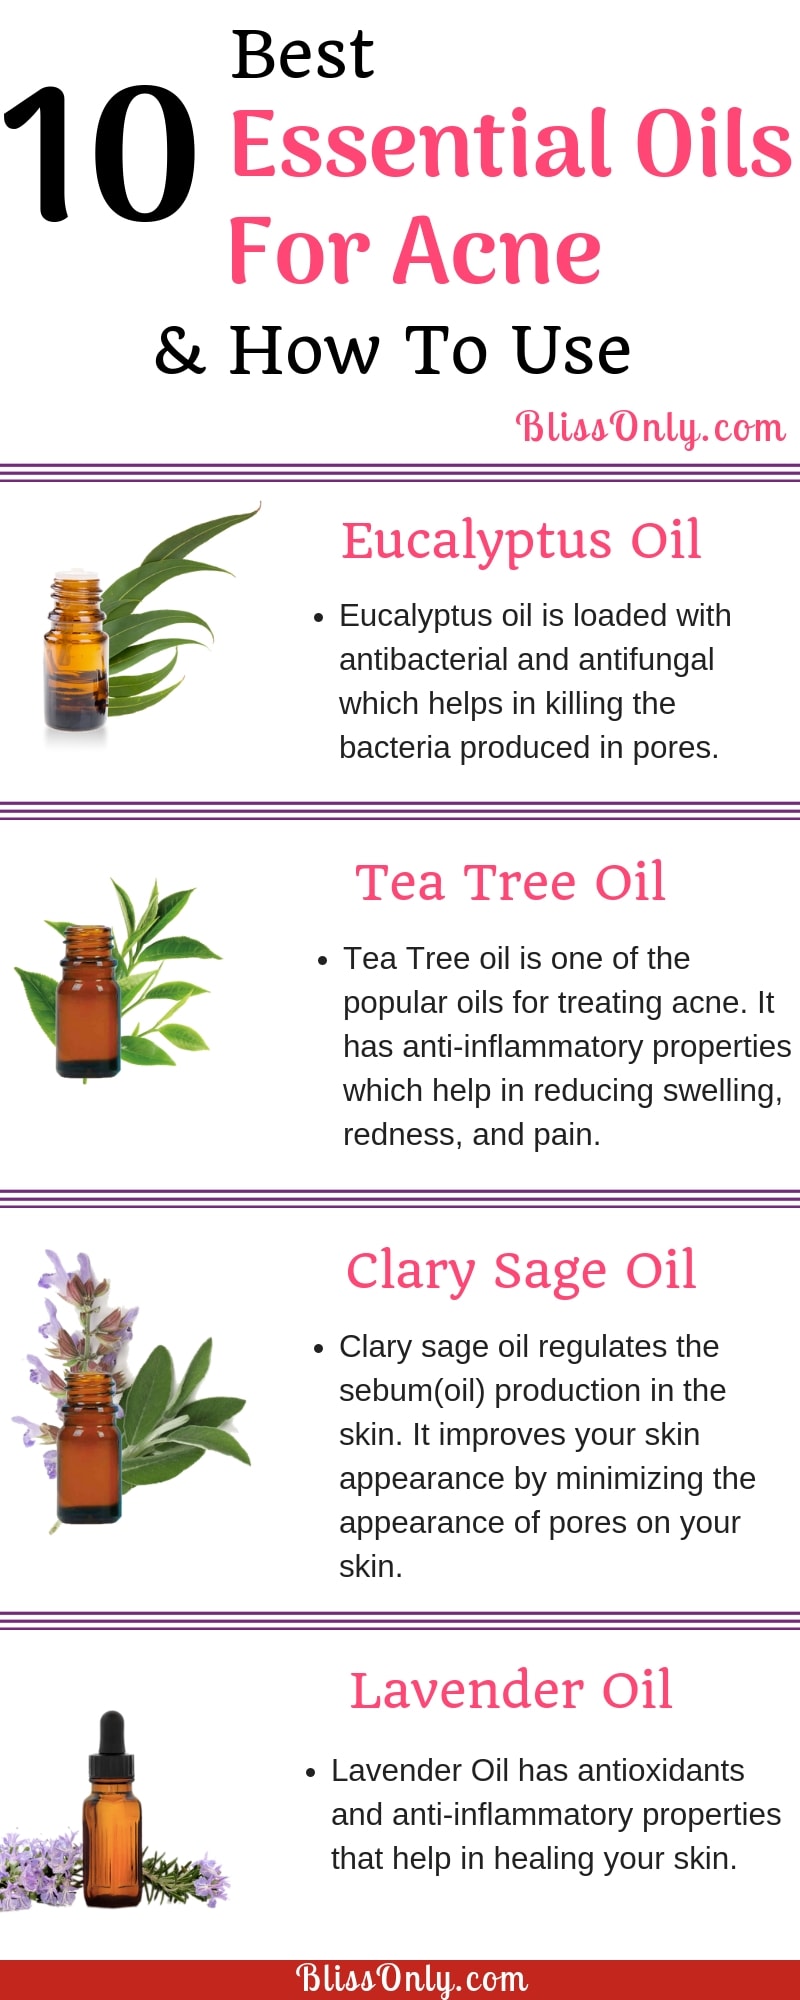 10 Best Essential Oils For Acne & How to Use - BlissOnly